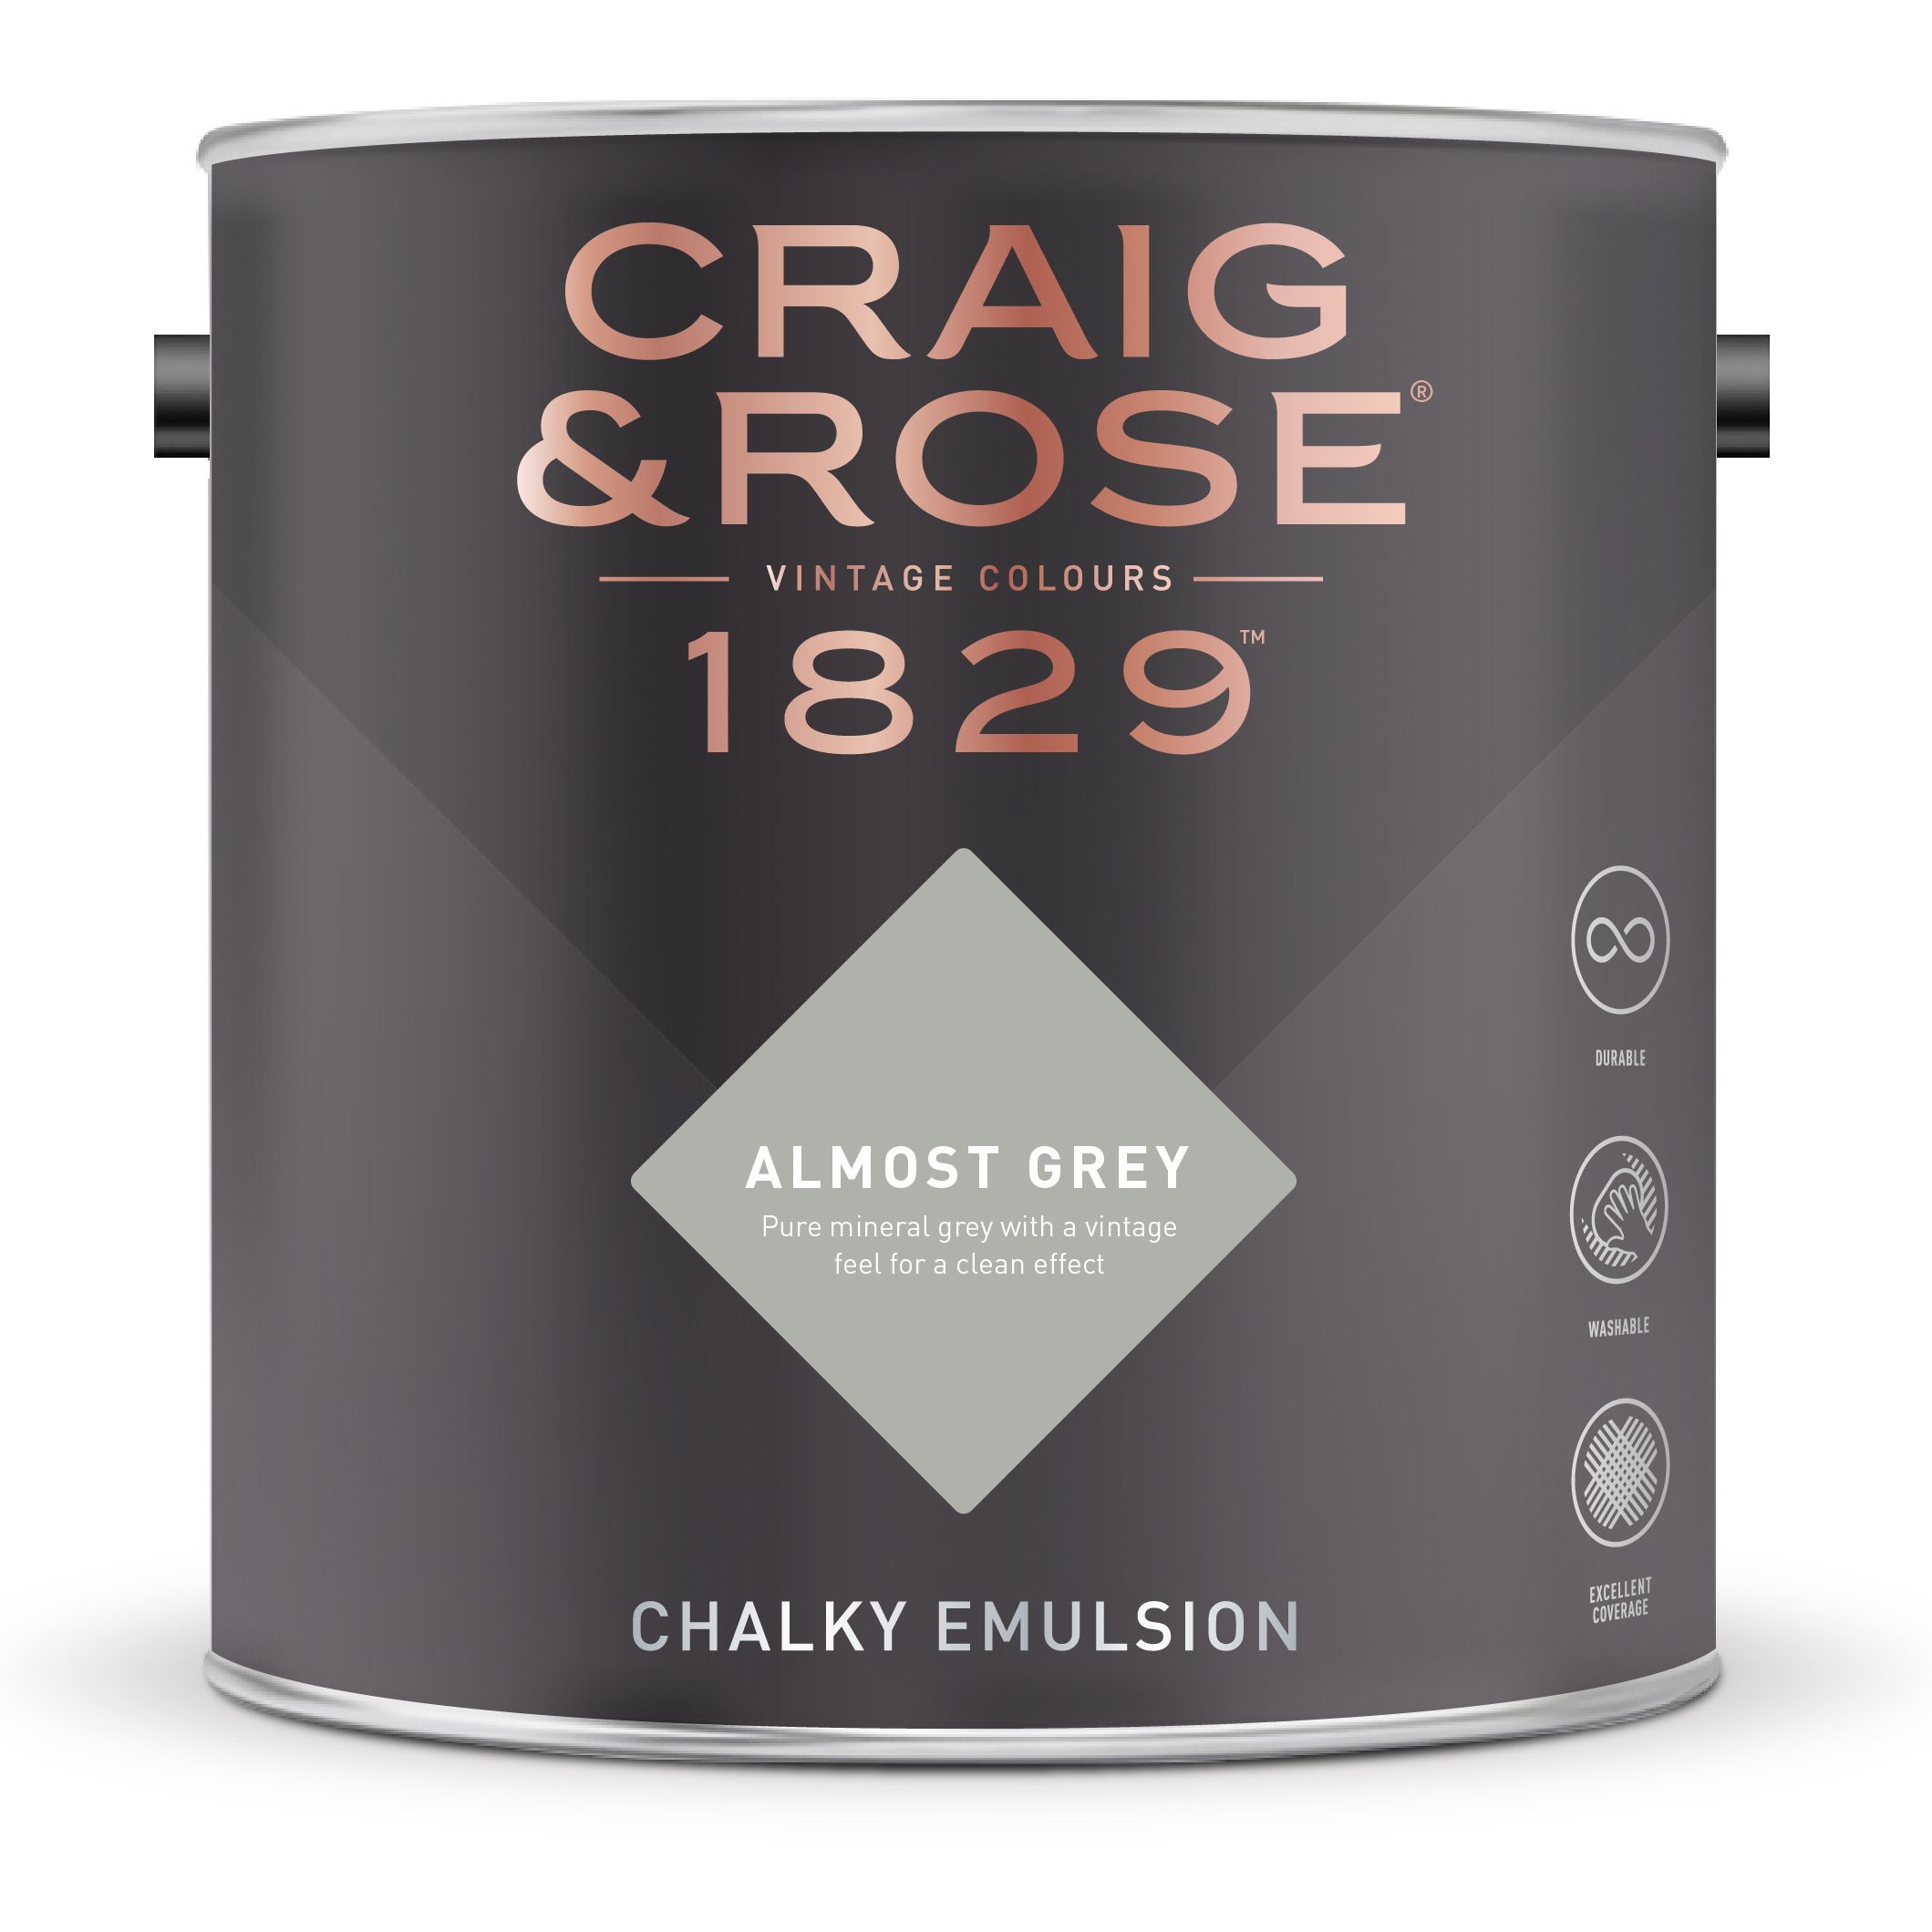 Craig & Rose 1829 Almost Grey Chalky Emulsion paint, 2.5L